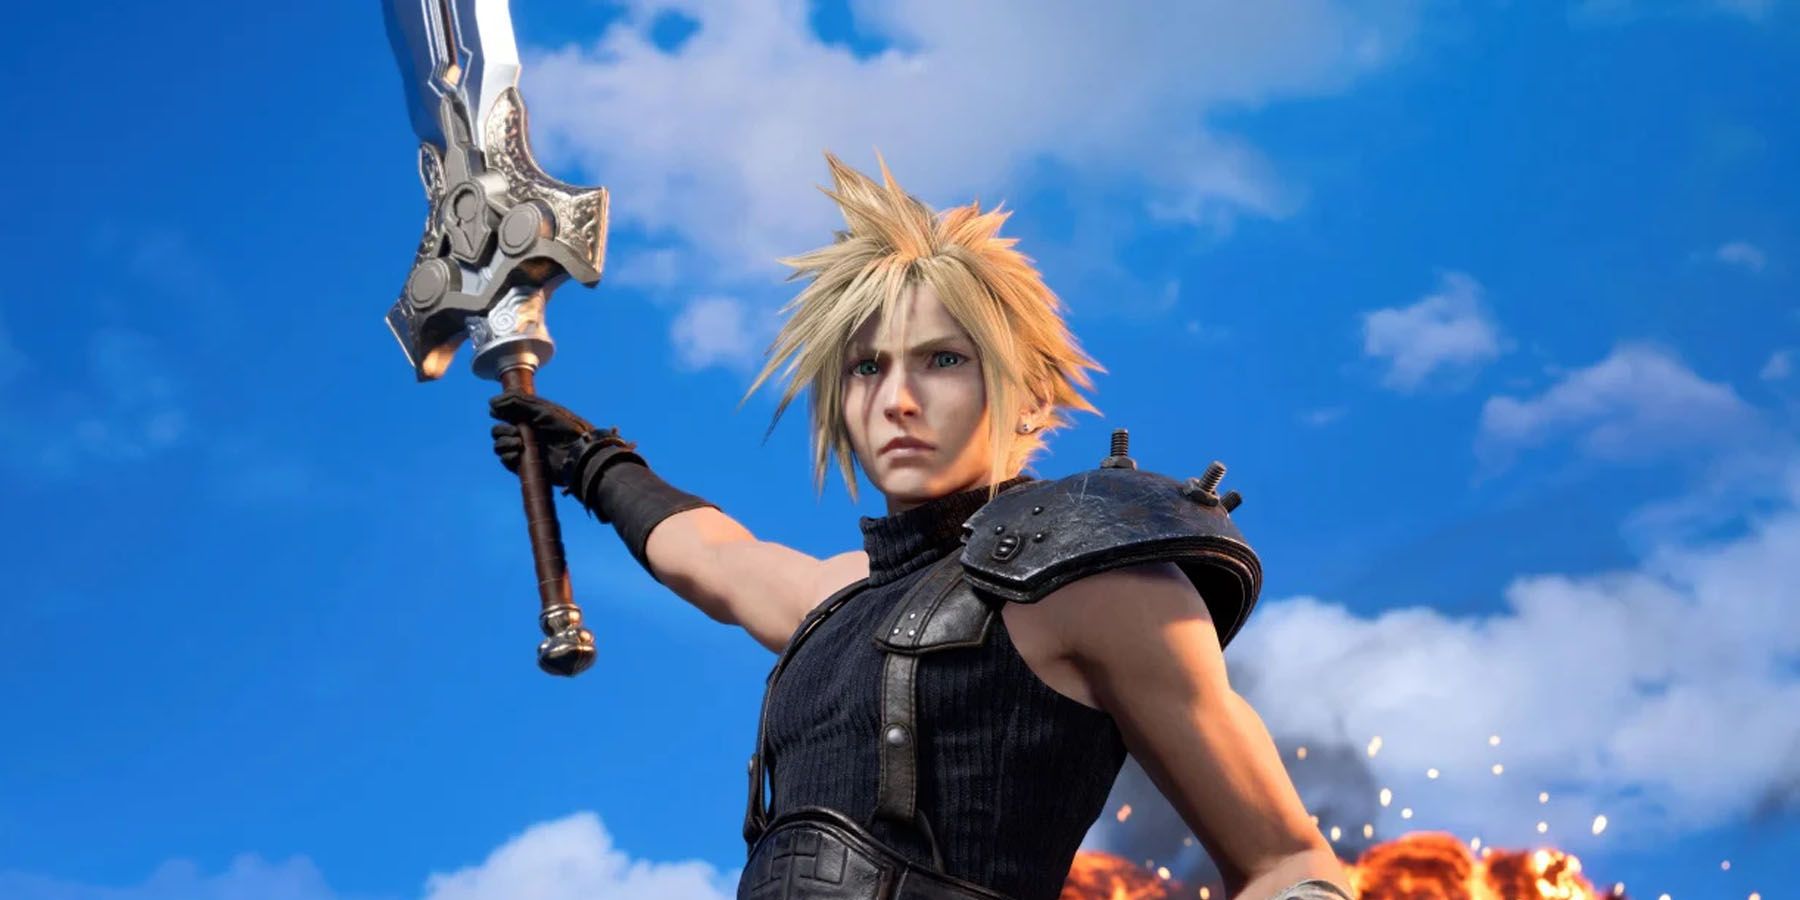 A screenshot of Cloud Strife holding up a sword in Final Fantasy 7 Rebirth.